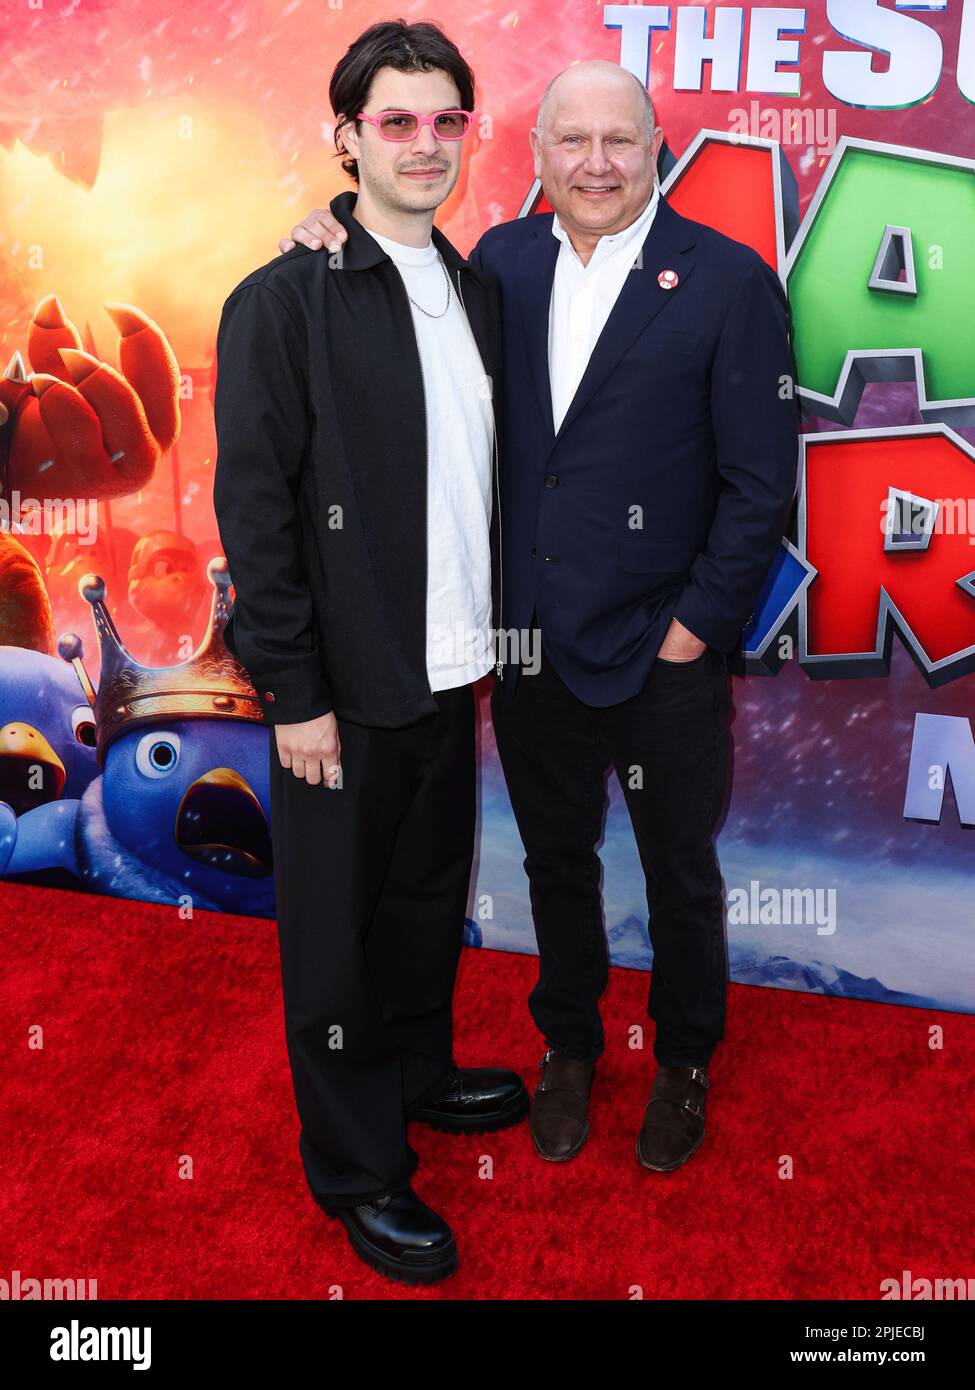 LOS ANGELES, CALIFORNIA, USA - APRIL 01: Chris Meledandri arrives at the Los Angeles Special Screening Of Universal Pictures, Nintendo And Illumination Entertainment's 'The Super Mario Bros. Movie' held at the Regal Cinemas LA Live & 4DX Movie on April 1, 2023 in Los Angeles, California, United States. (Photo by Xavier Collin/Image Press Agency) Stock Photo